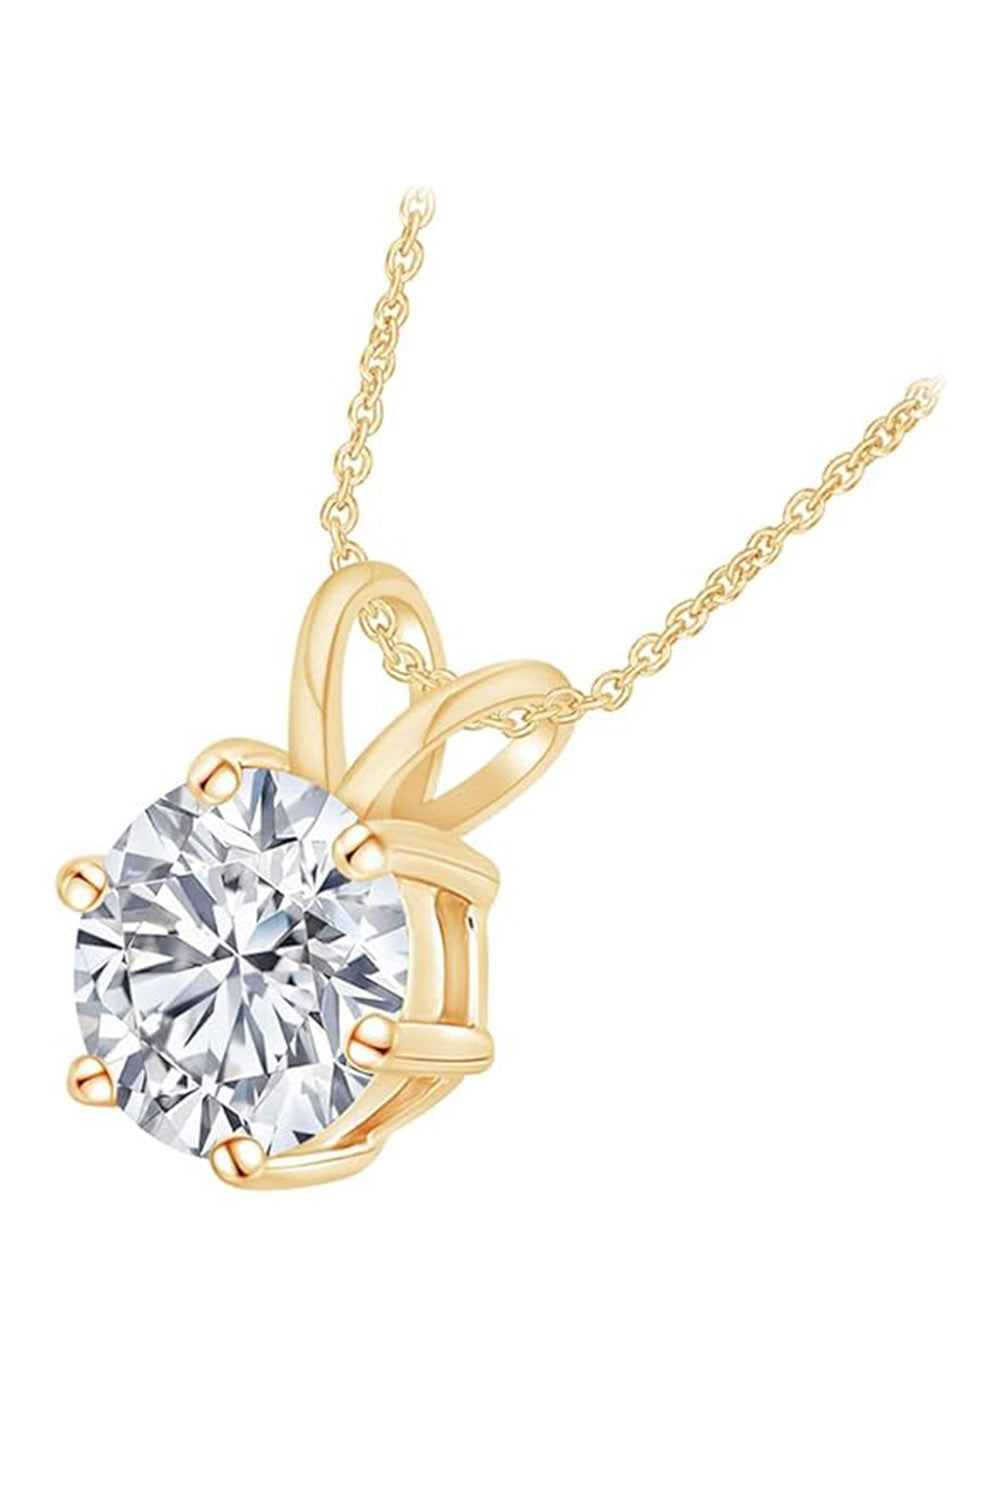 Yellow Gold Color 6 Prong Solitaire Pendant Necklace